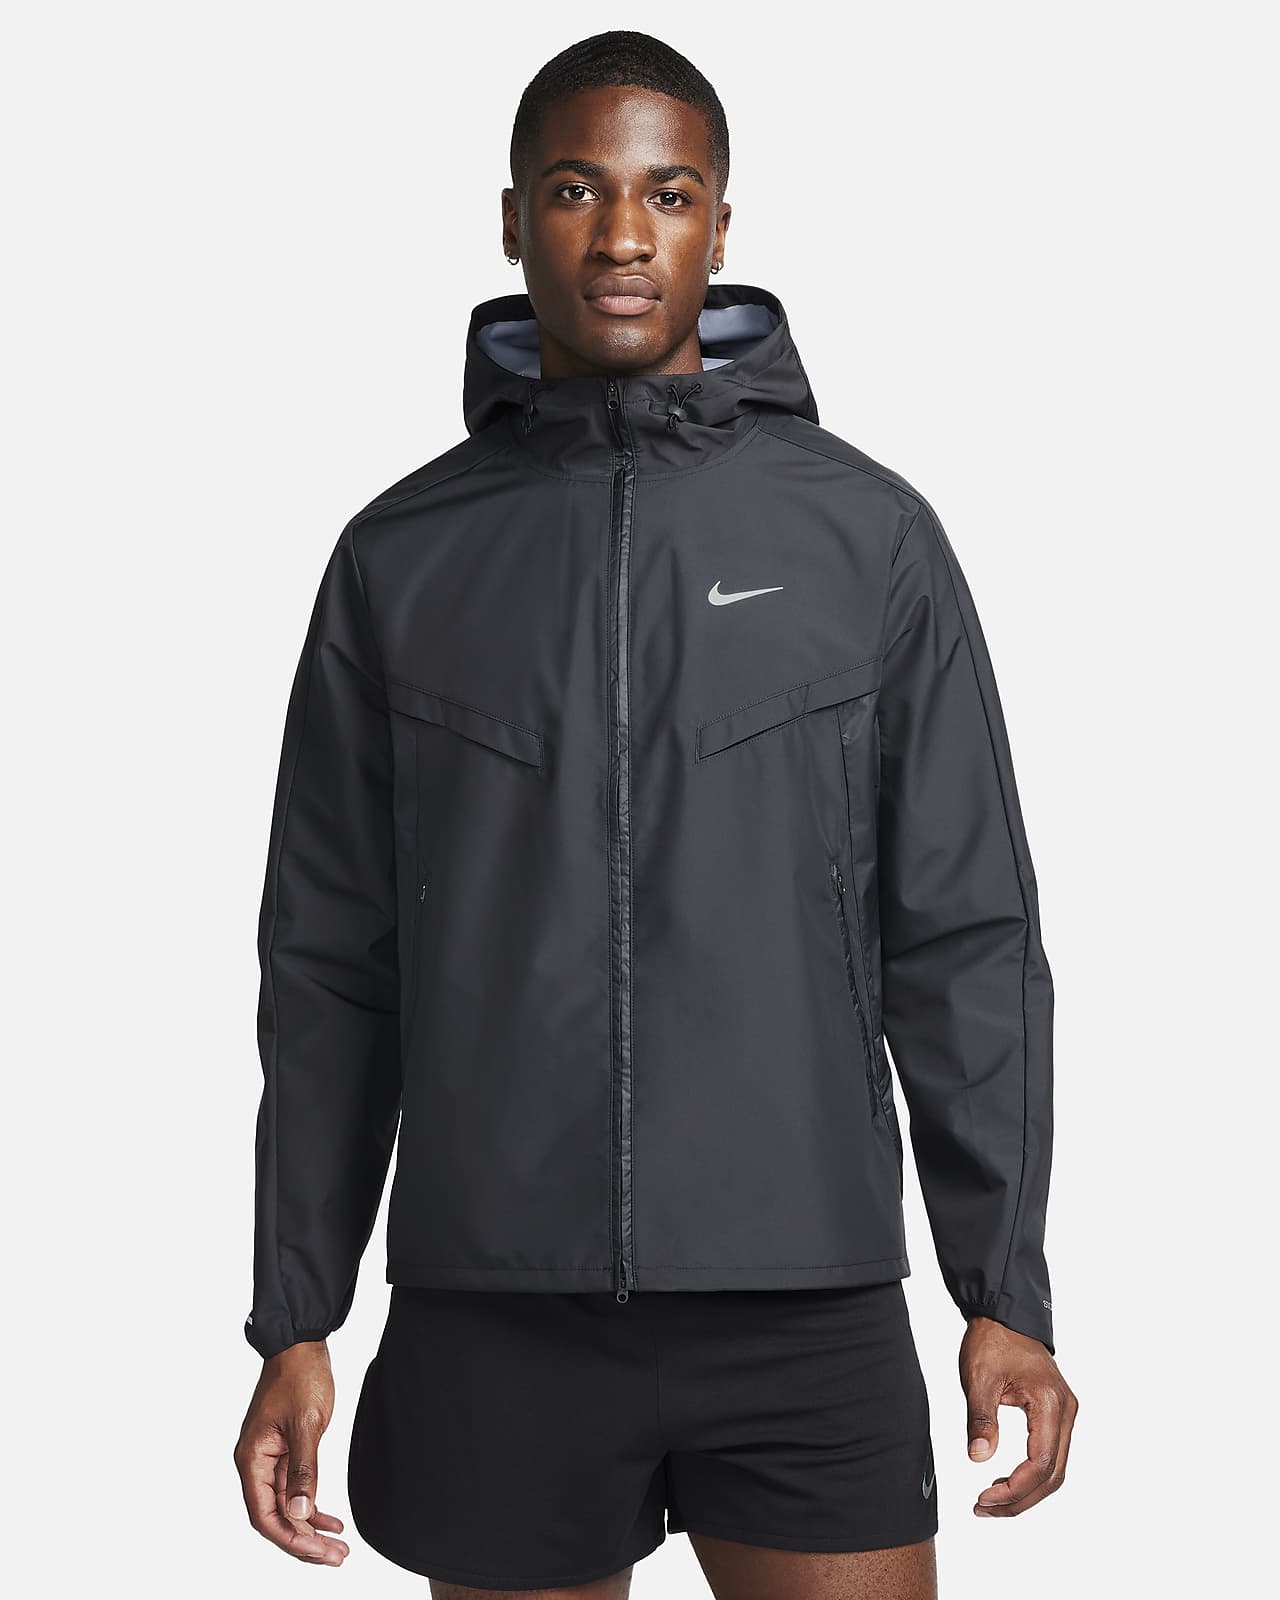 Why the Nike Windbreaker Jacket is a Must-Have